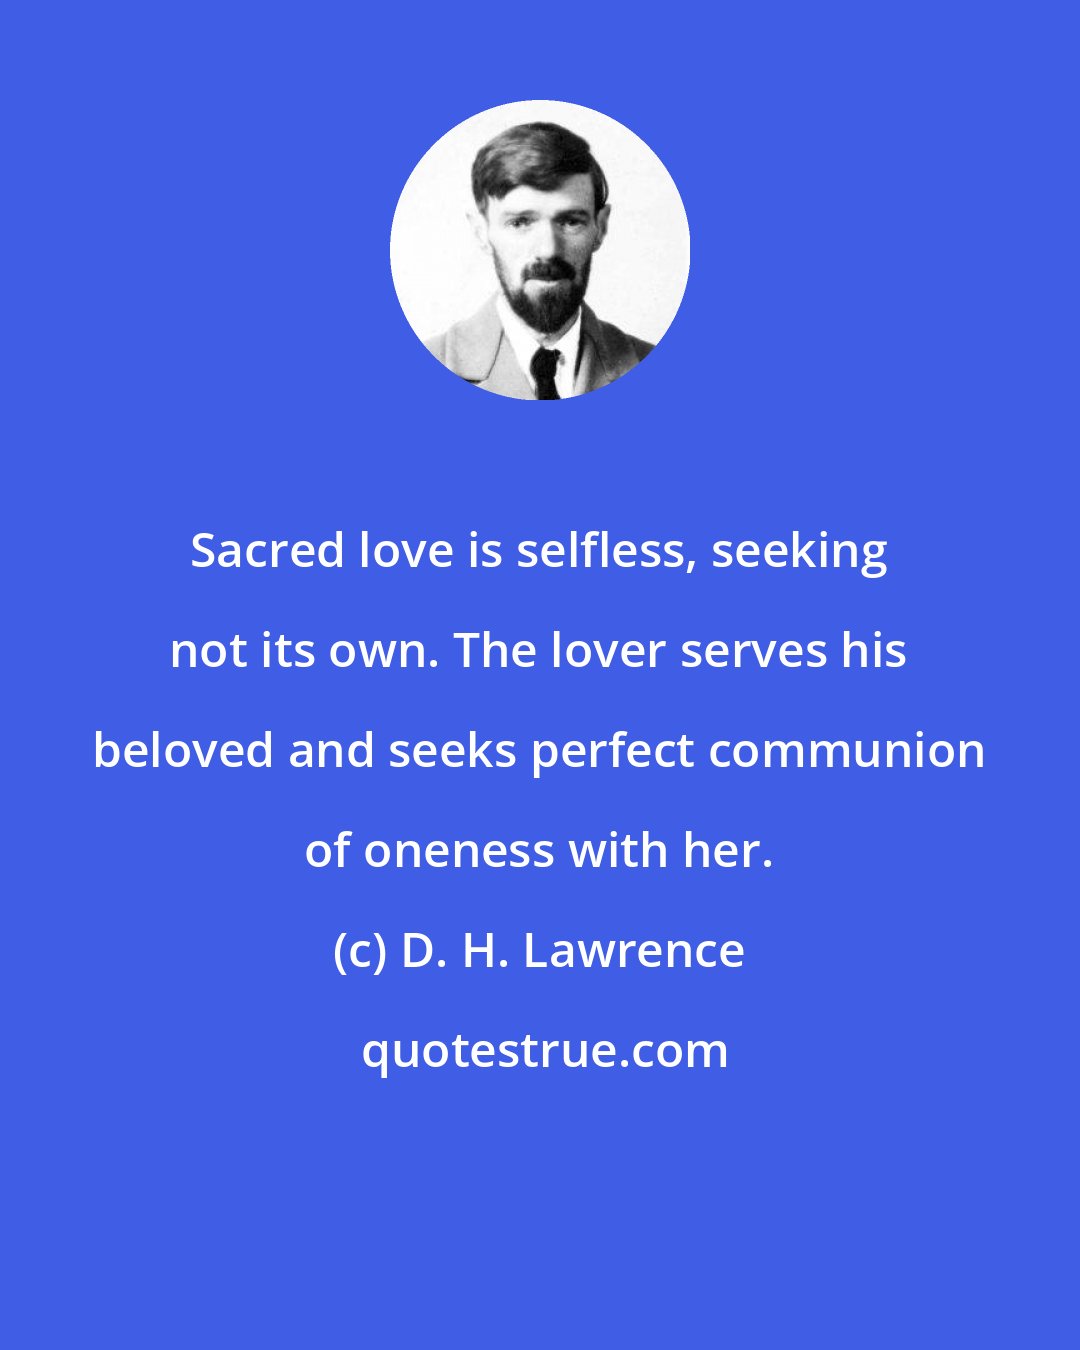 D. H. Lawrence: Sacred love is selfless, seeking not its own. The lover serves his beloved and seeks perfect communion of oneness with her.